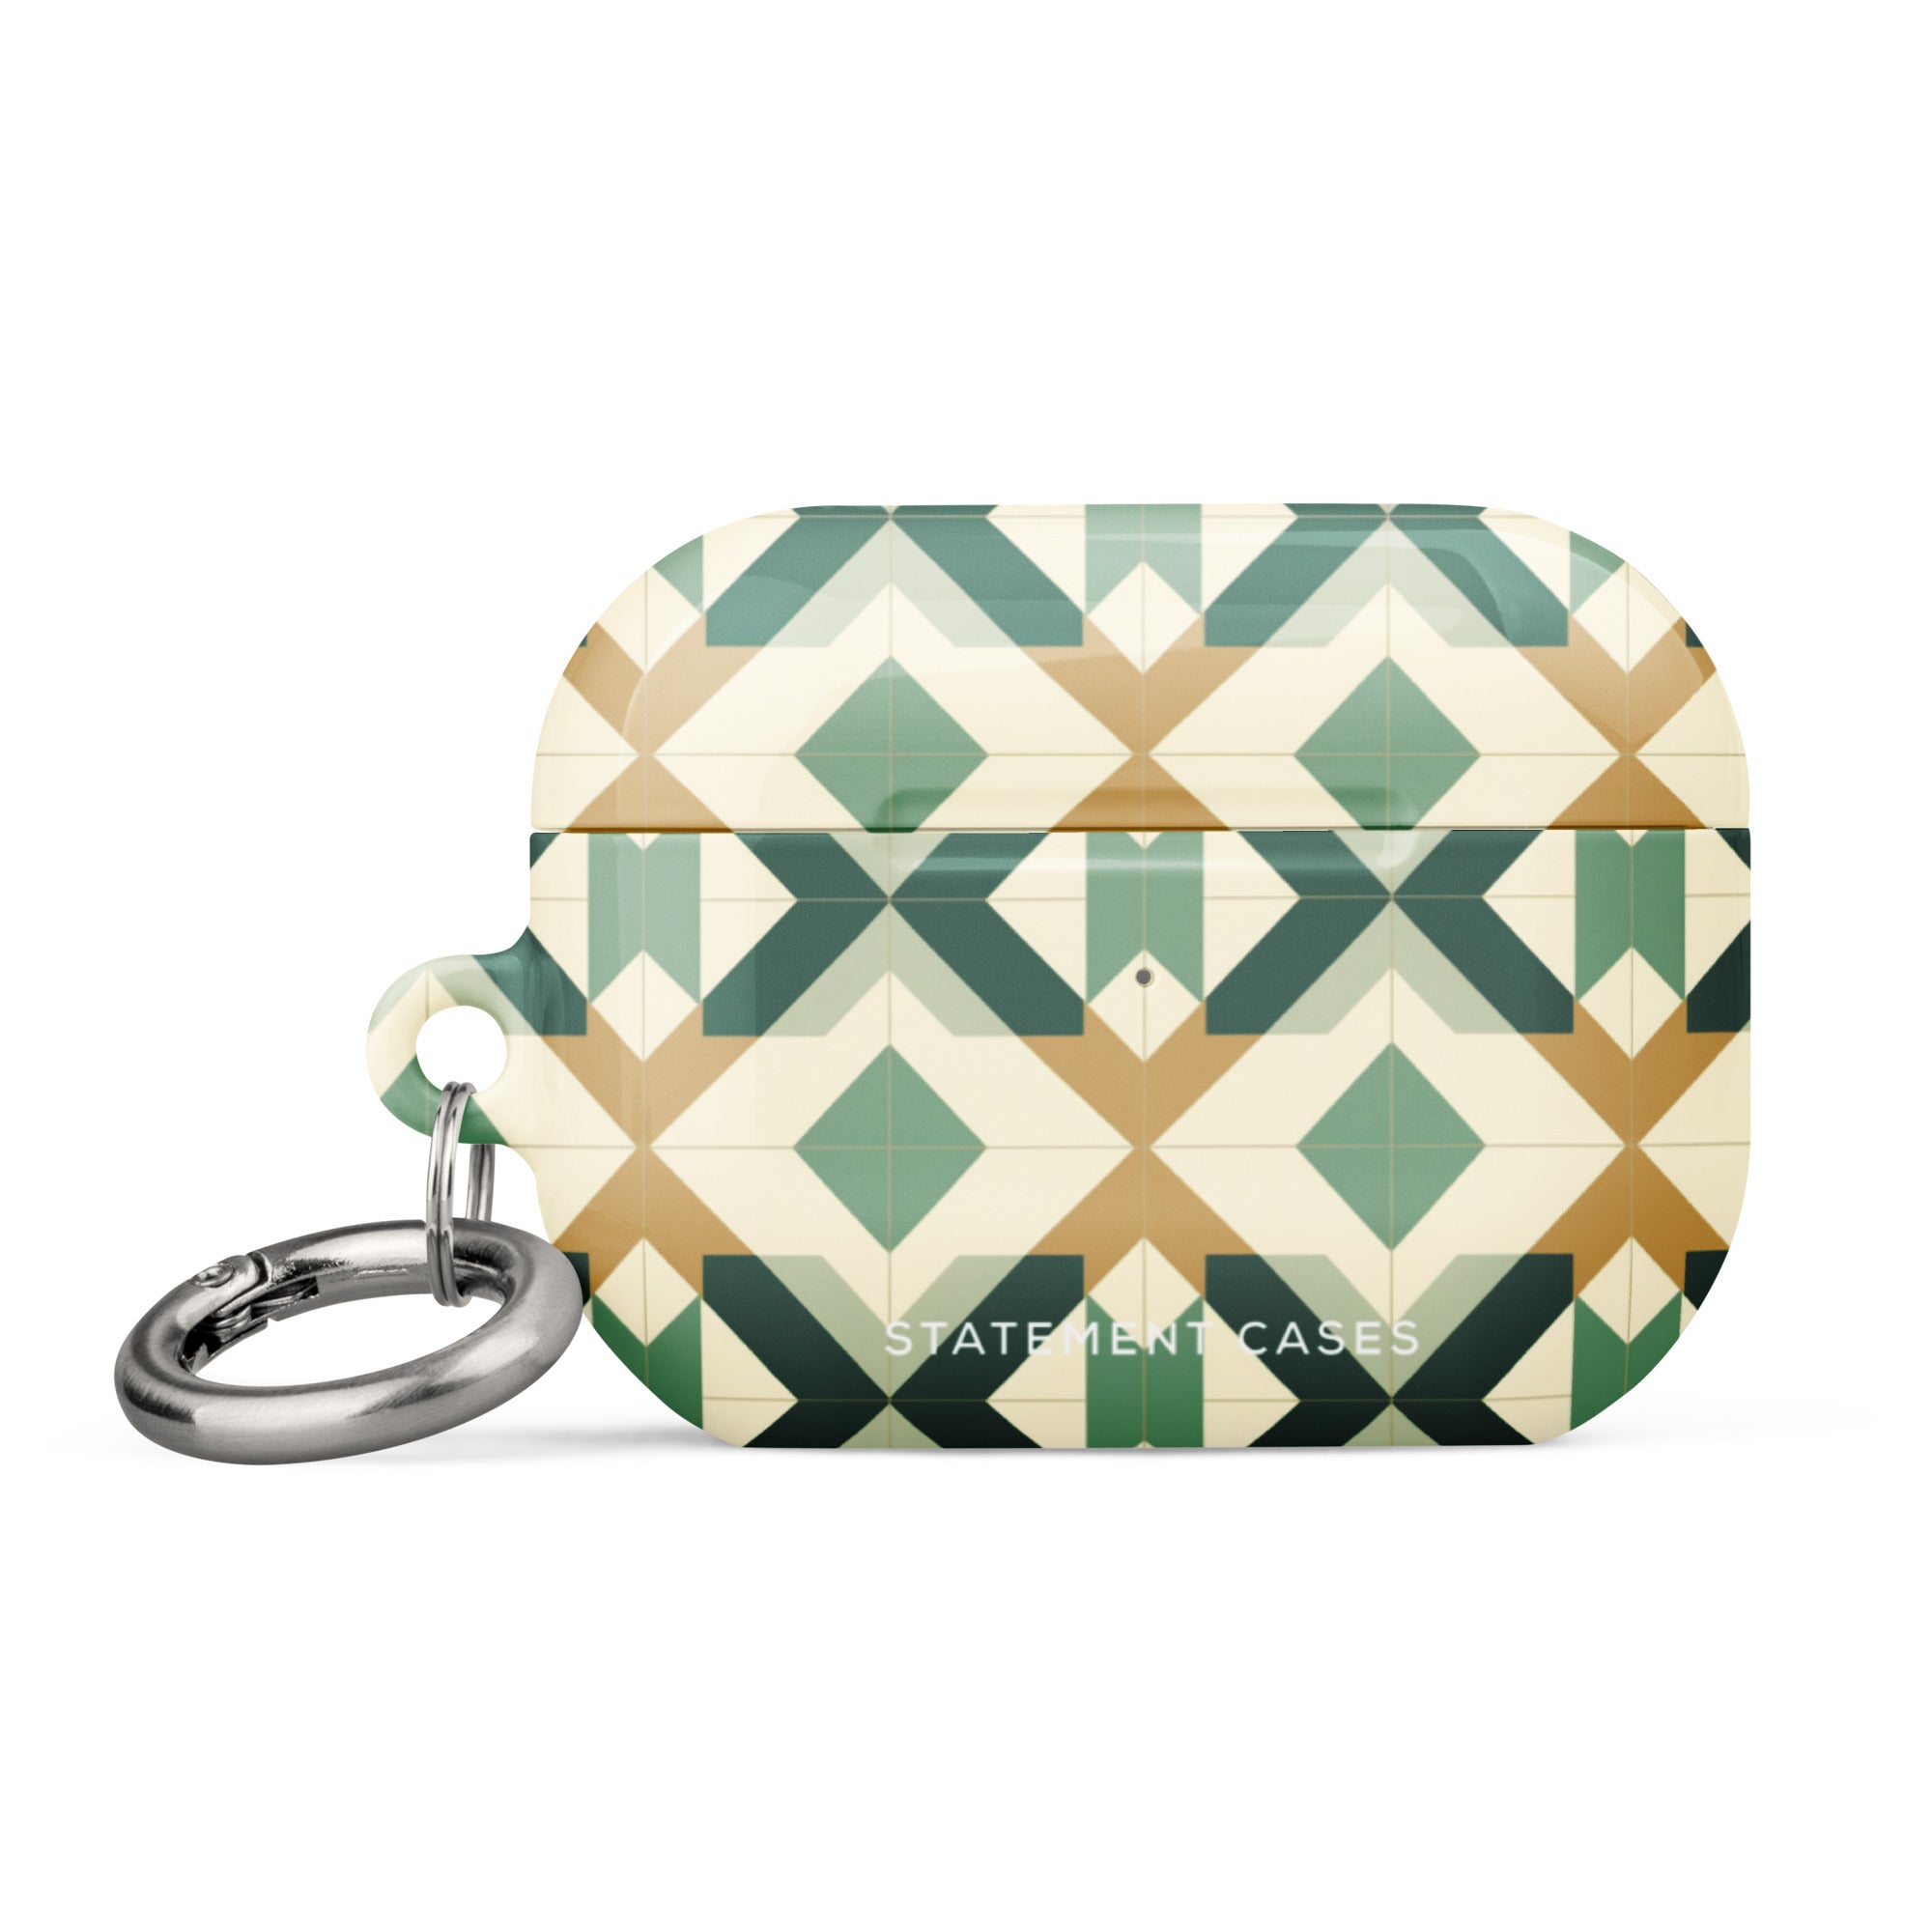 An Old World Mosaic for AirPods Pro Gen 2 from Statement Cases featuring a geometric design in green, beige, and gold hues. The impact-absorbing case includes a metal carabiner attachment on the left side for convenience.